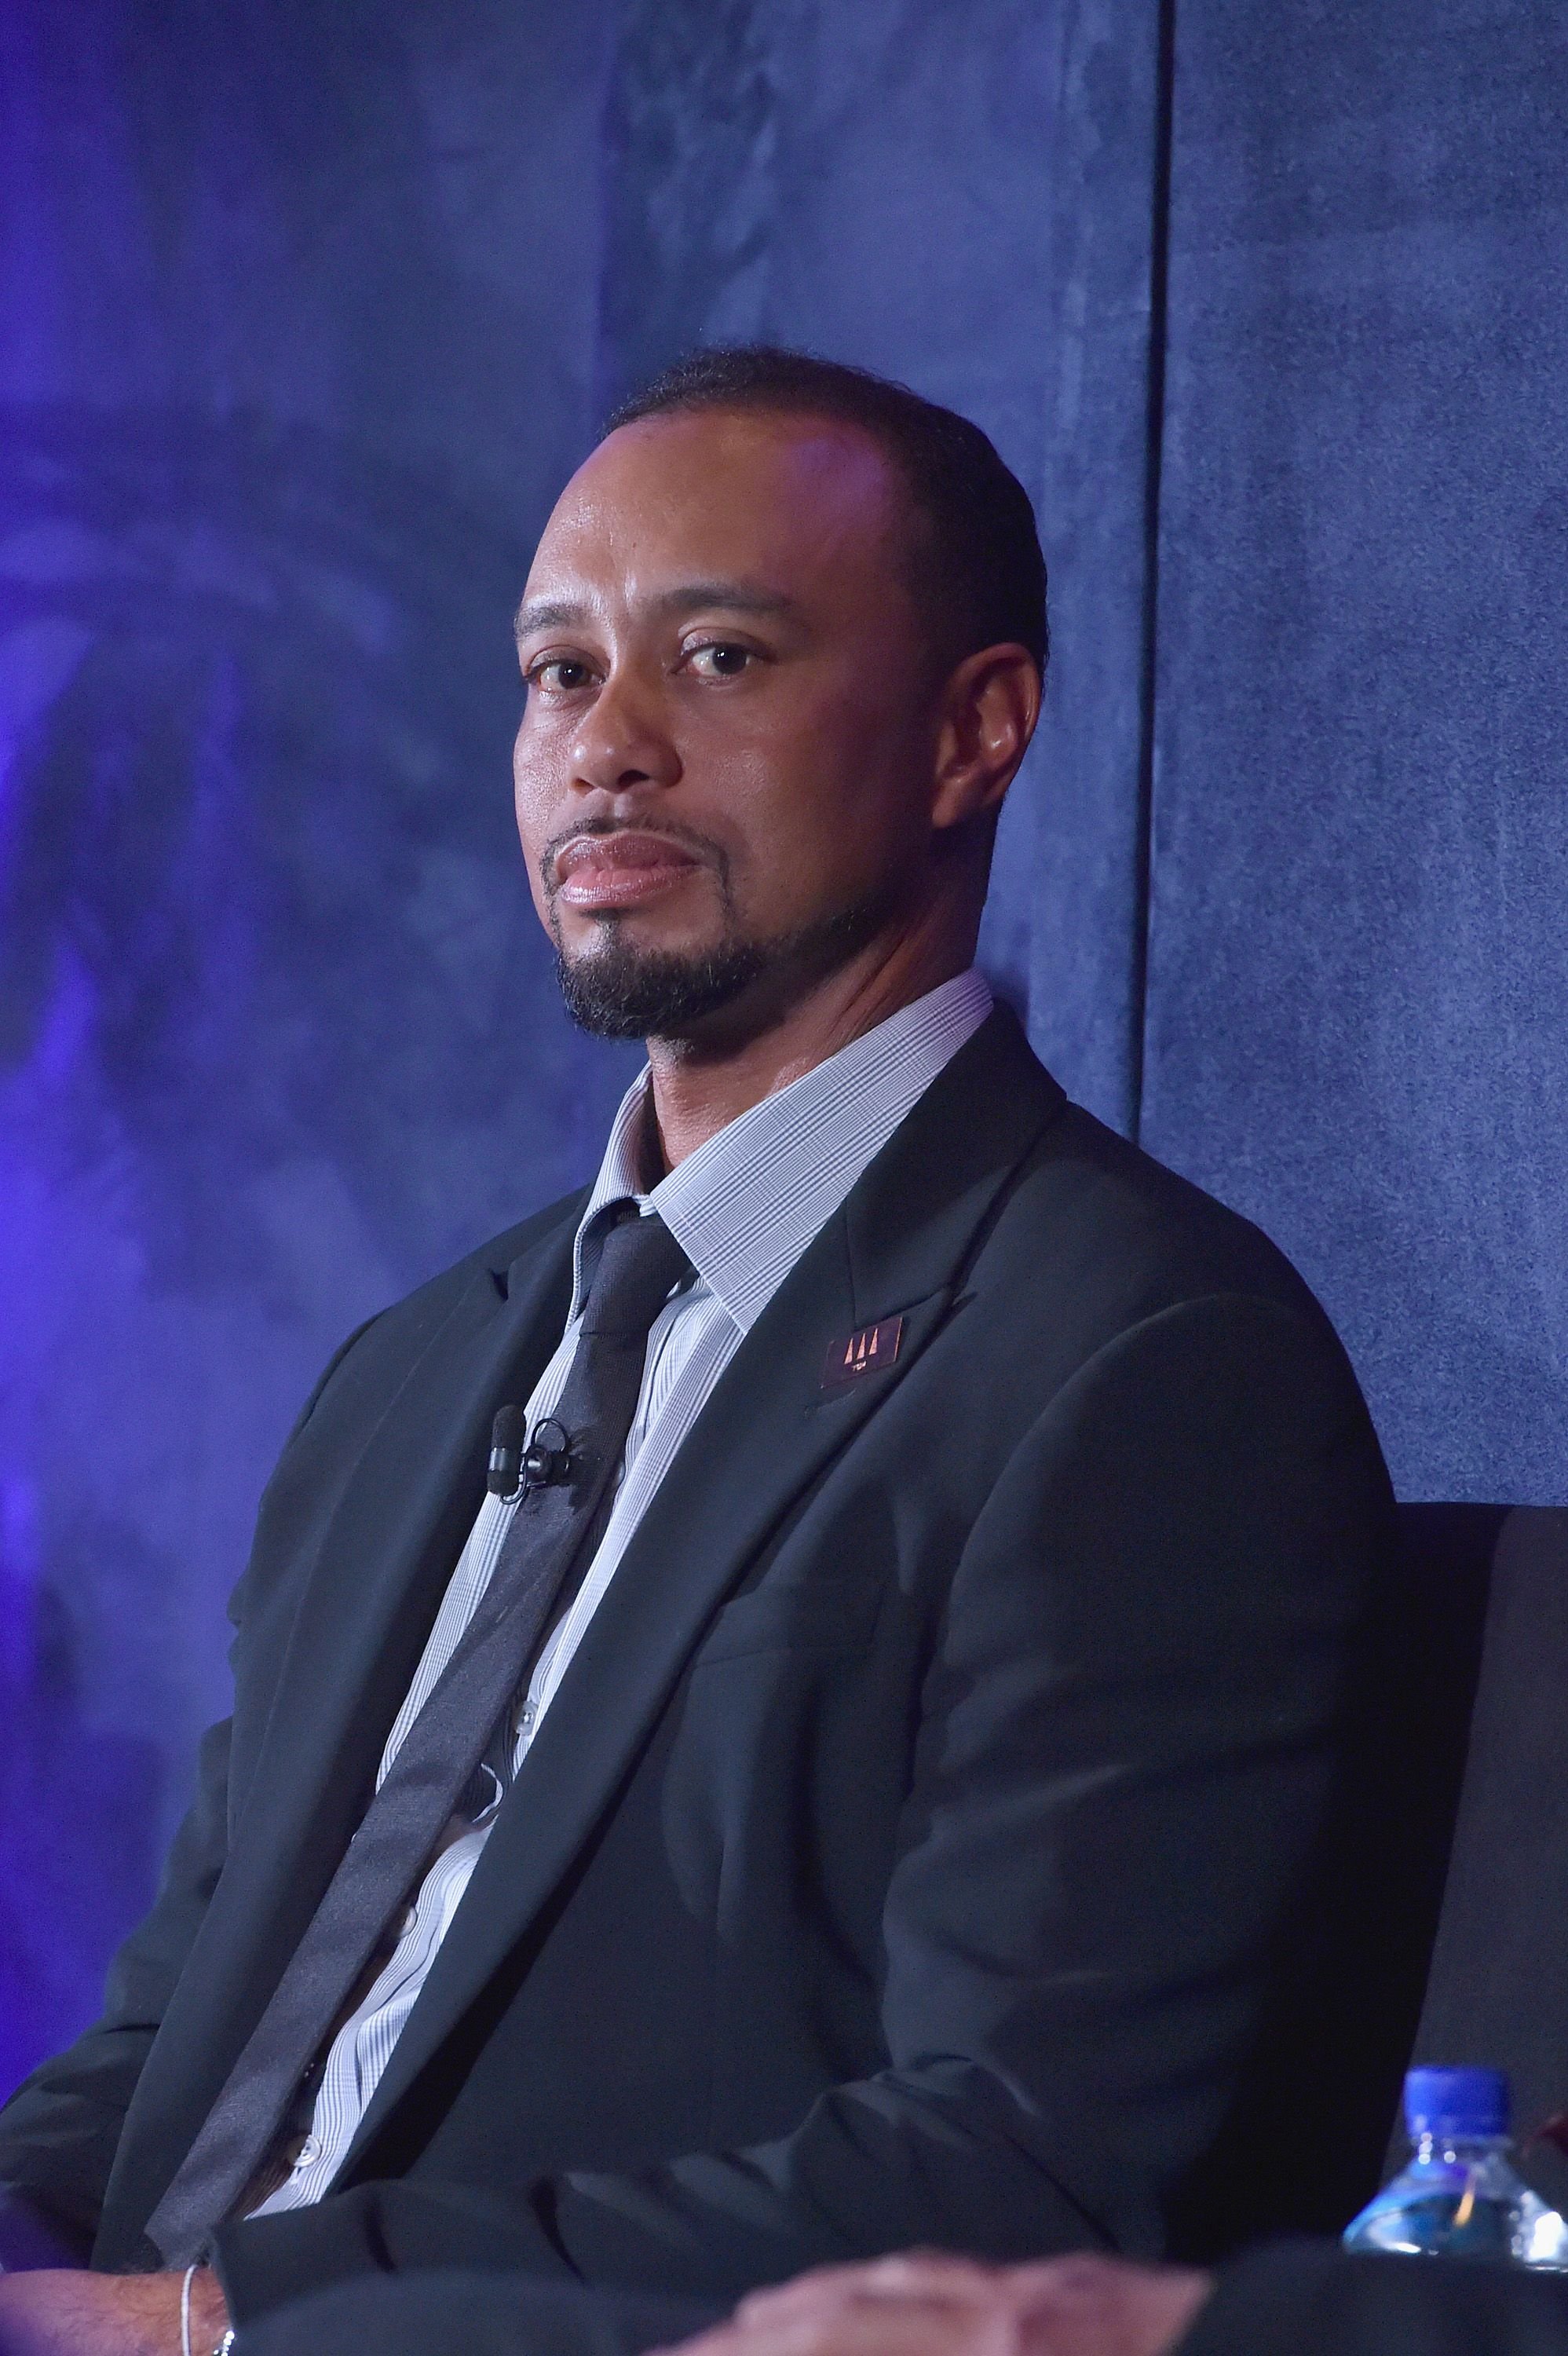 Tiger Woods speaks onstage during the Tiger Woods Foundation's 20th Anniversary Celebration at the New York Public Library on October 20, 2016 in New York City. | Source: Getty Images